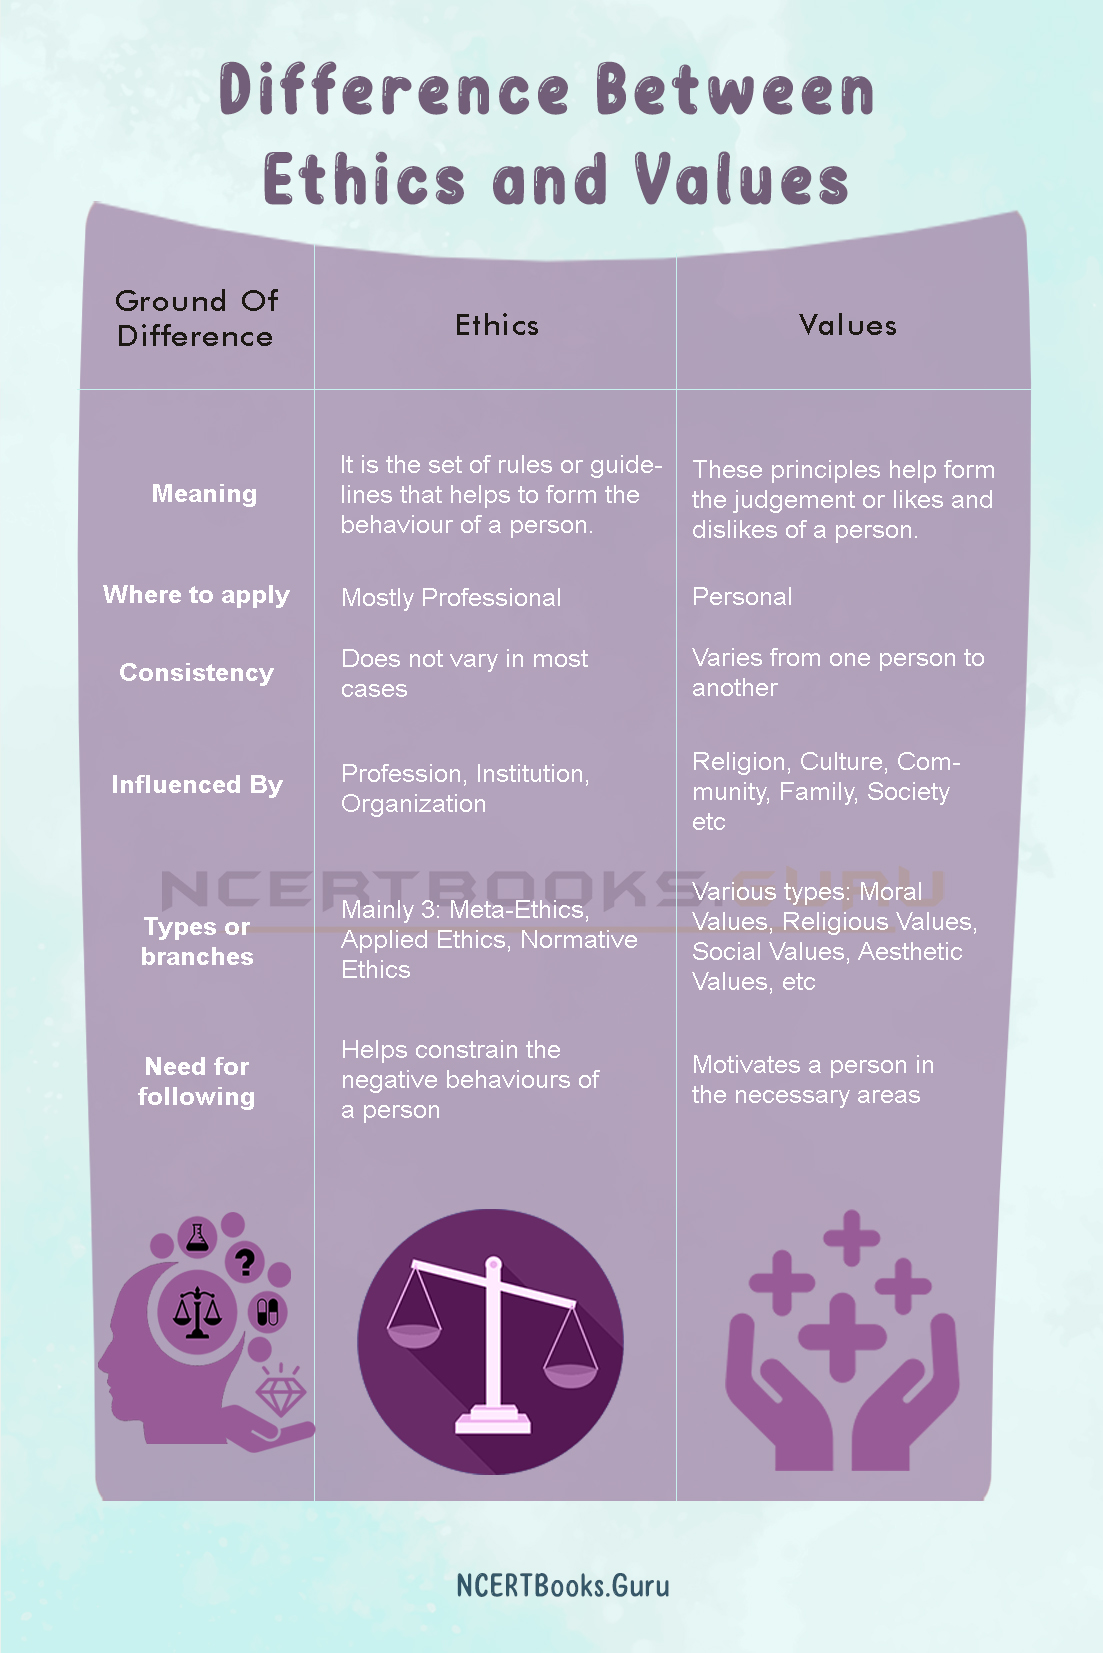 Difference Between Ethics and Values 2